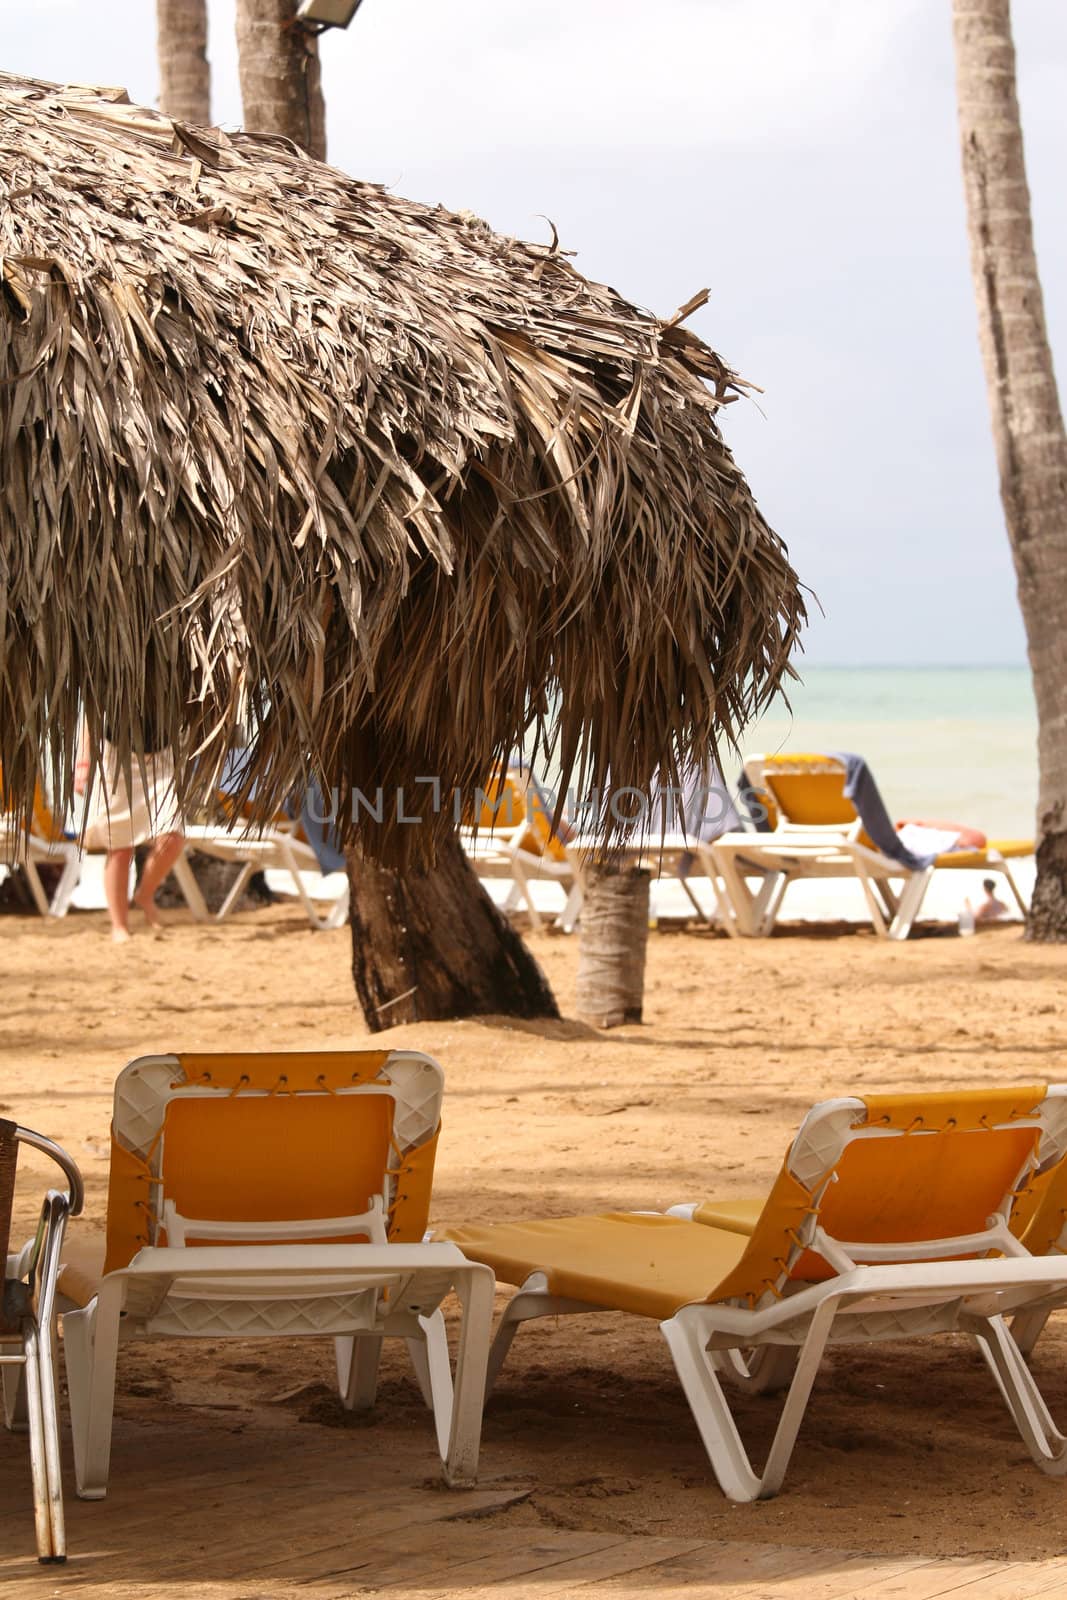 chaise longues and sunshade on the beach